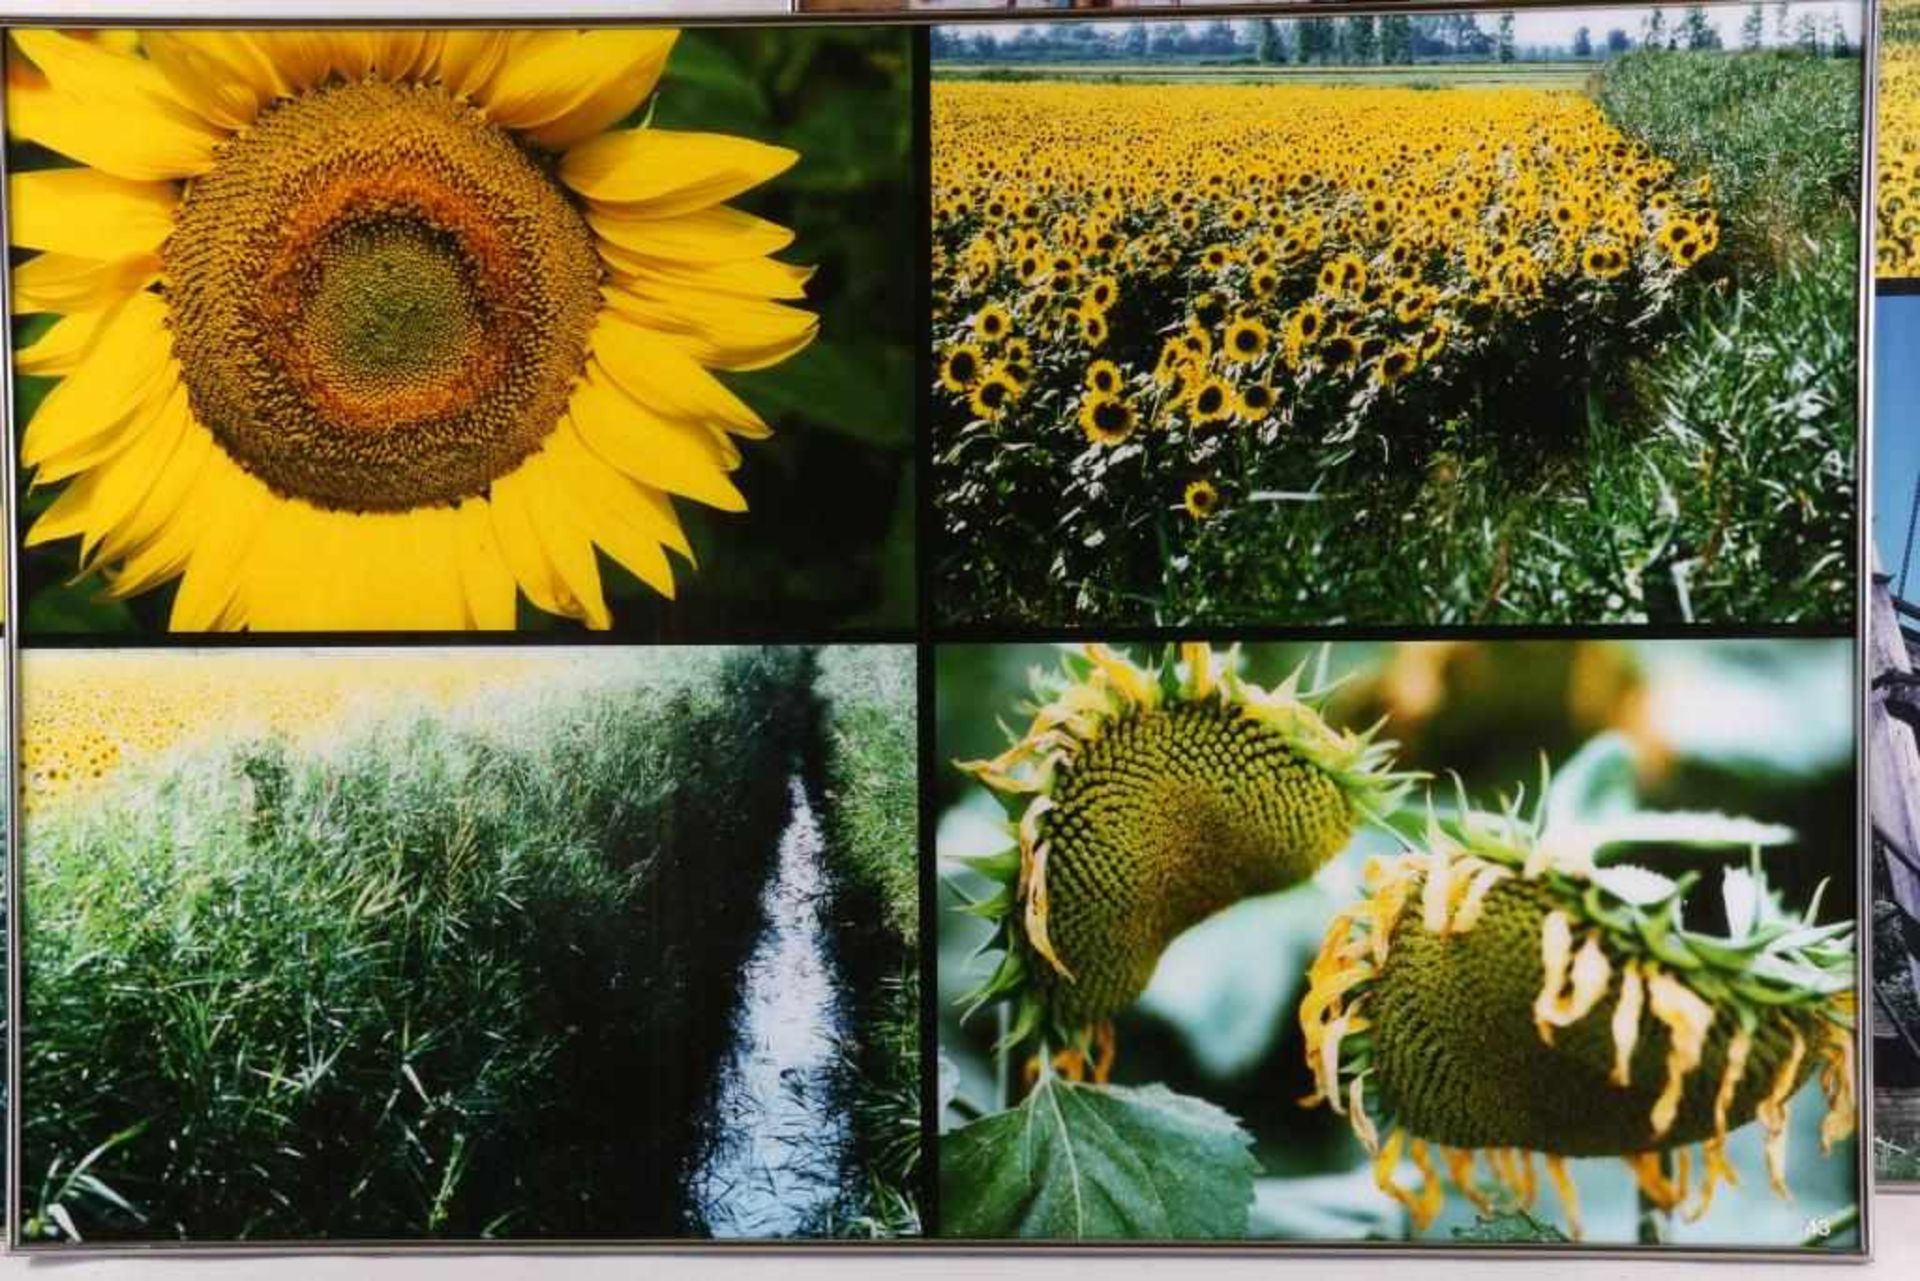 Huf, Paul (1924-2002), Sunflowers, South of France, 3 compilations of photographs 120 x 80 cm. - Bild 2 aus 4